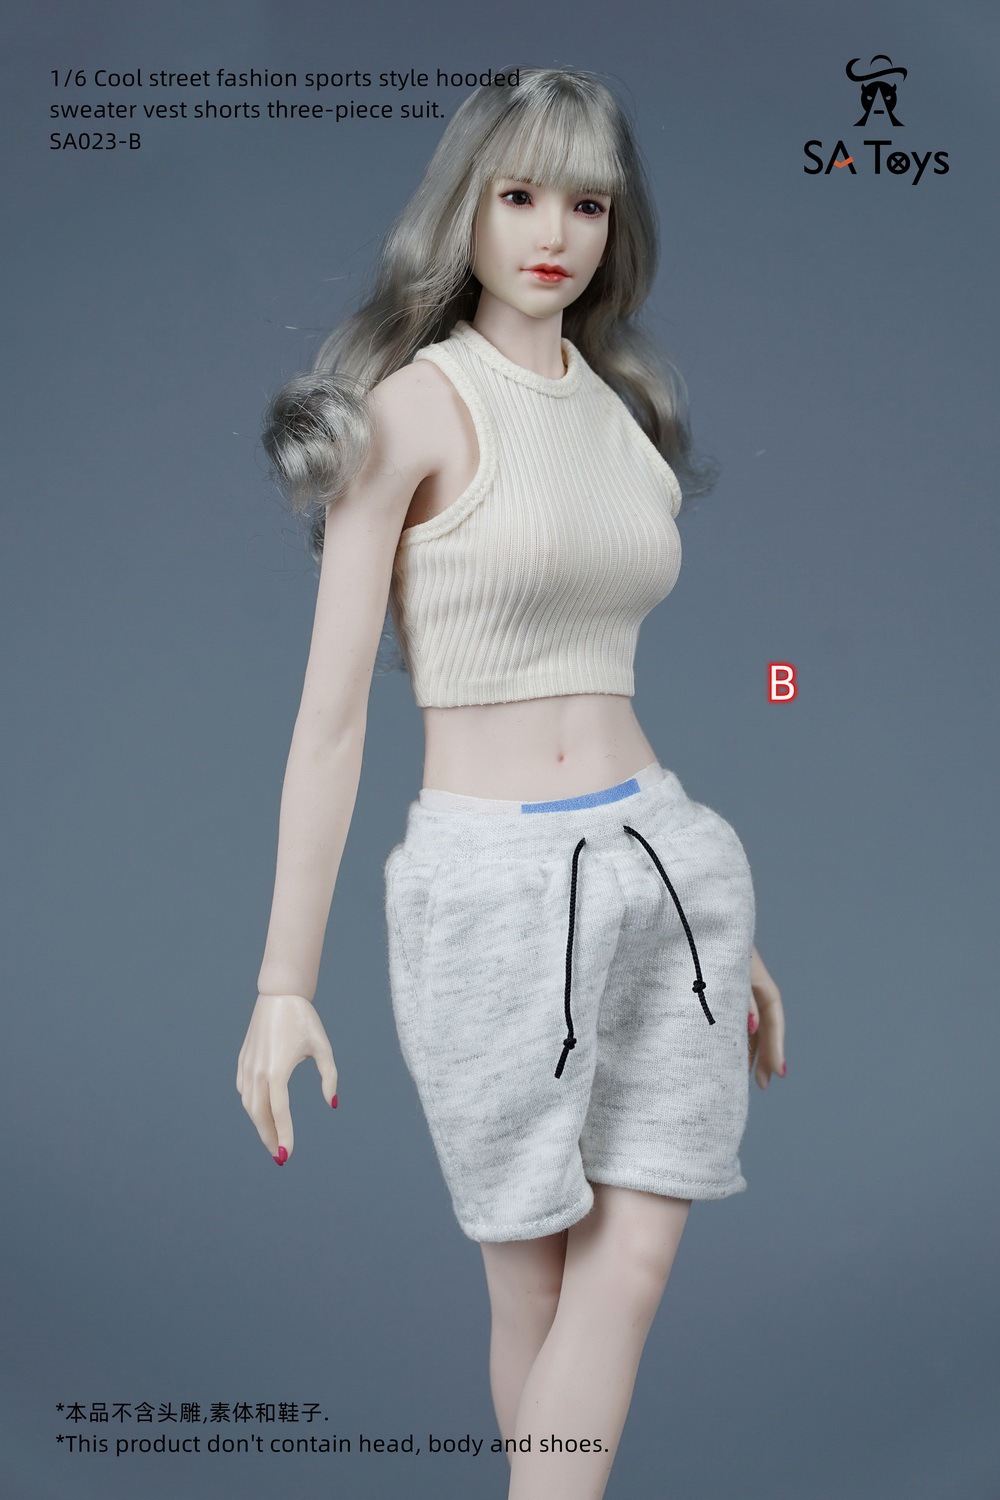 hiphop - NEW PRODUCT: SA Toys: 1/6 hip skirt / floral elastic skirt / fashionable sports style hooded sweater cover, hip-hop fisherman hat halter and footwear casual pants [variety optional] 17020112